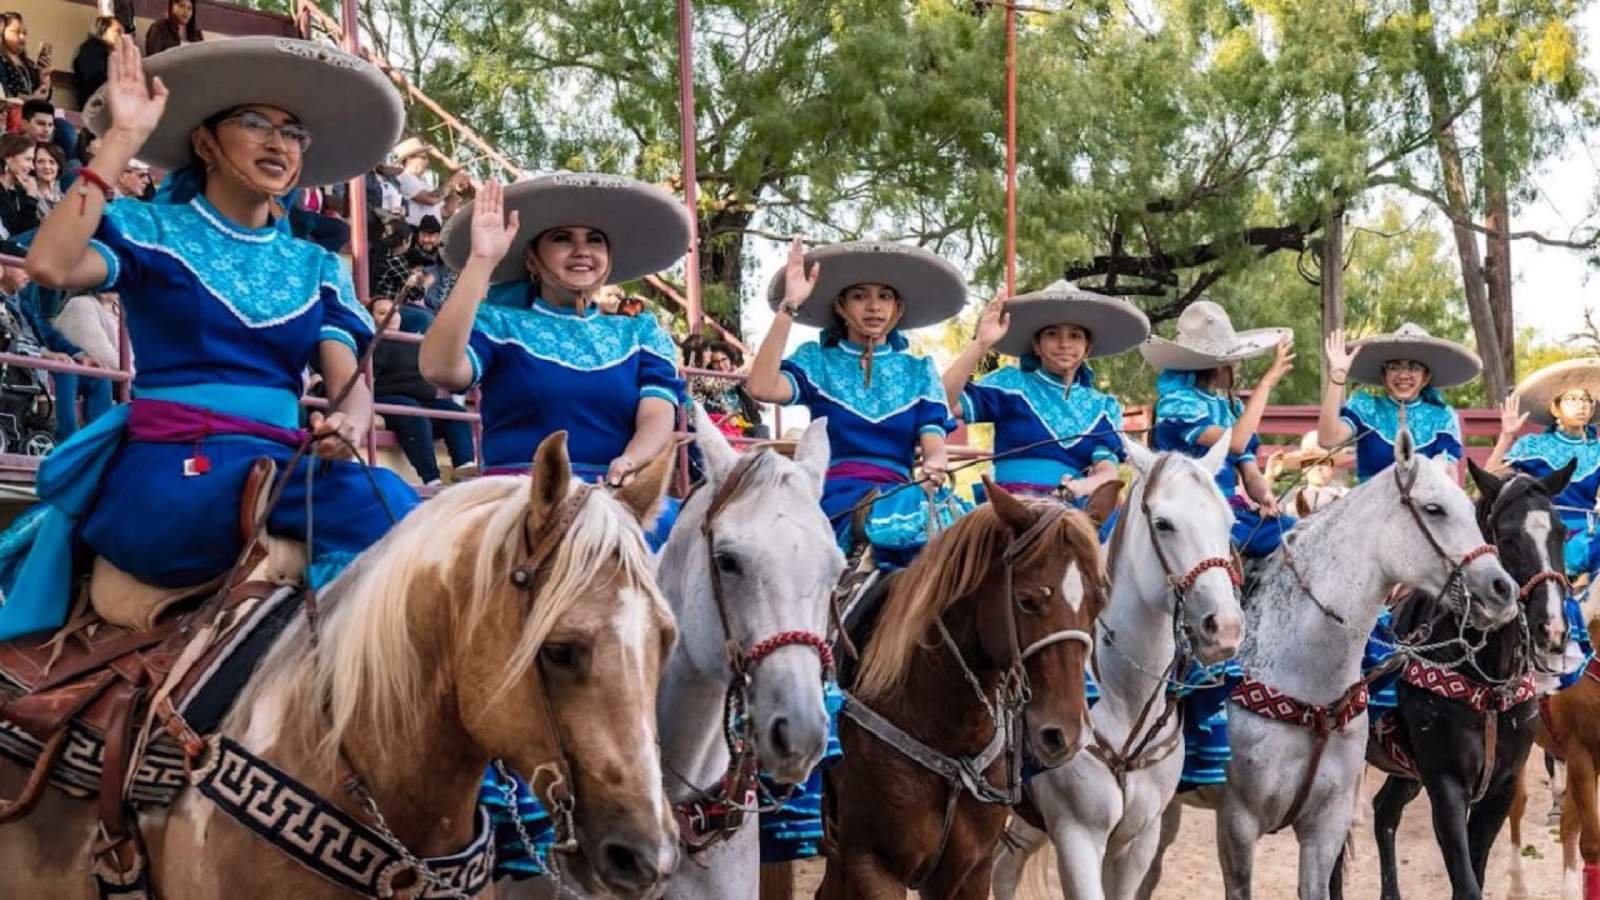 SA Rodeo introduces new event that celebrates Mexican culture